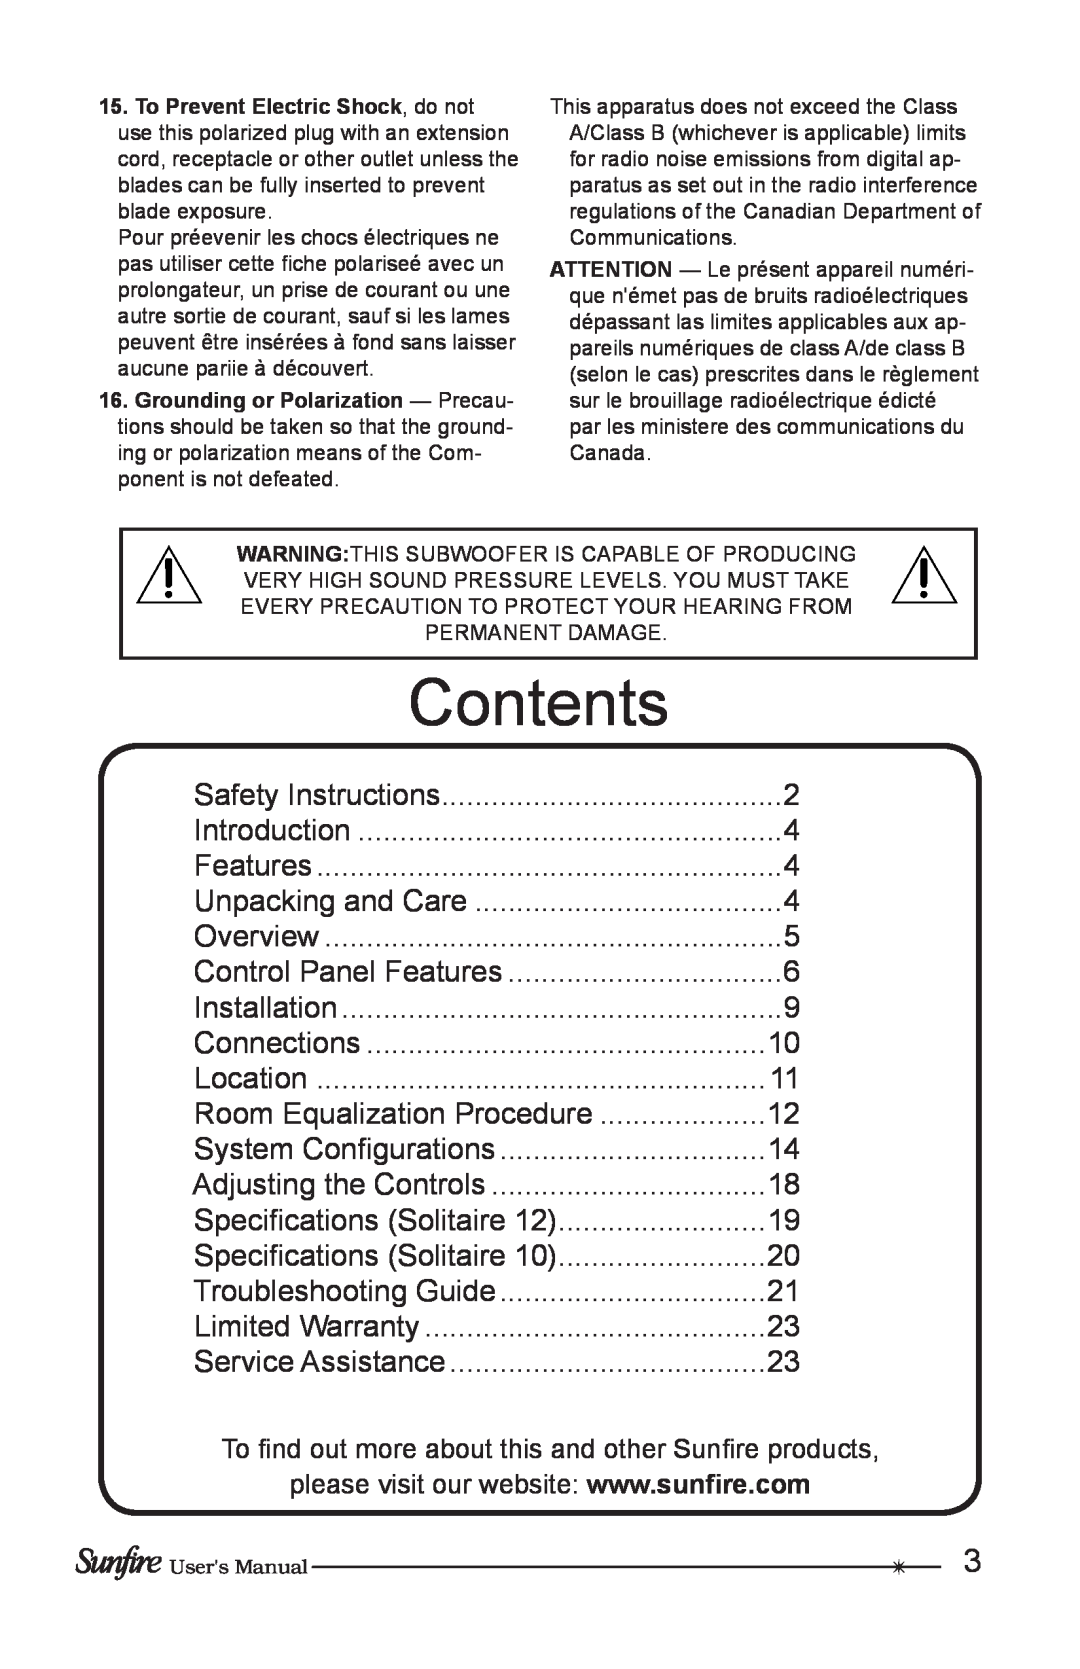 Sunfire Solitaire 10 user manual Contents 